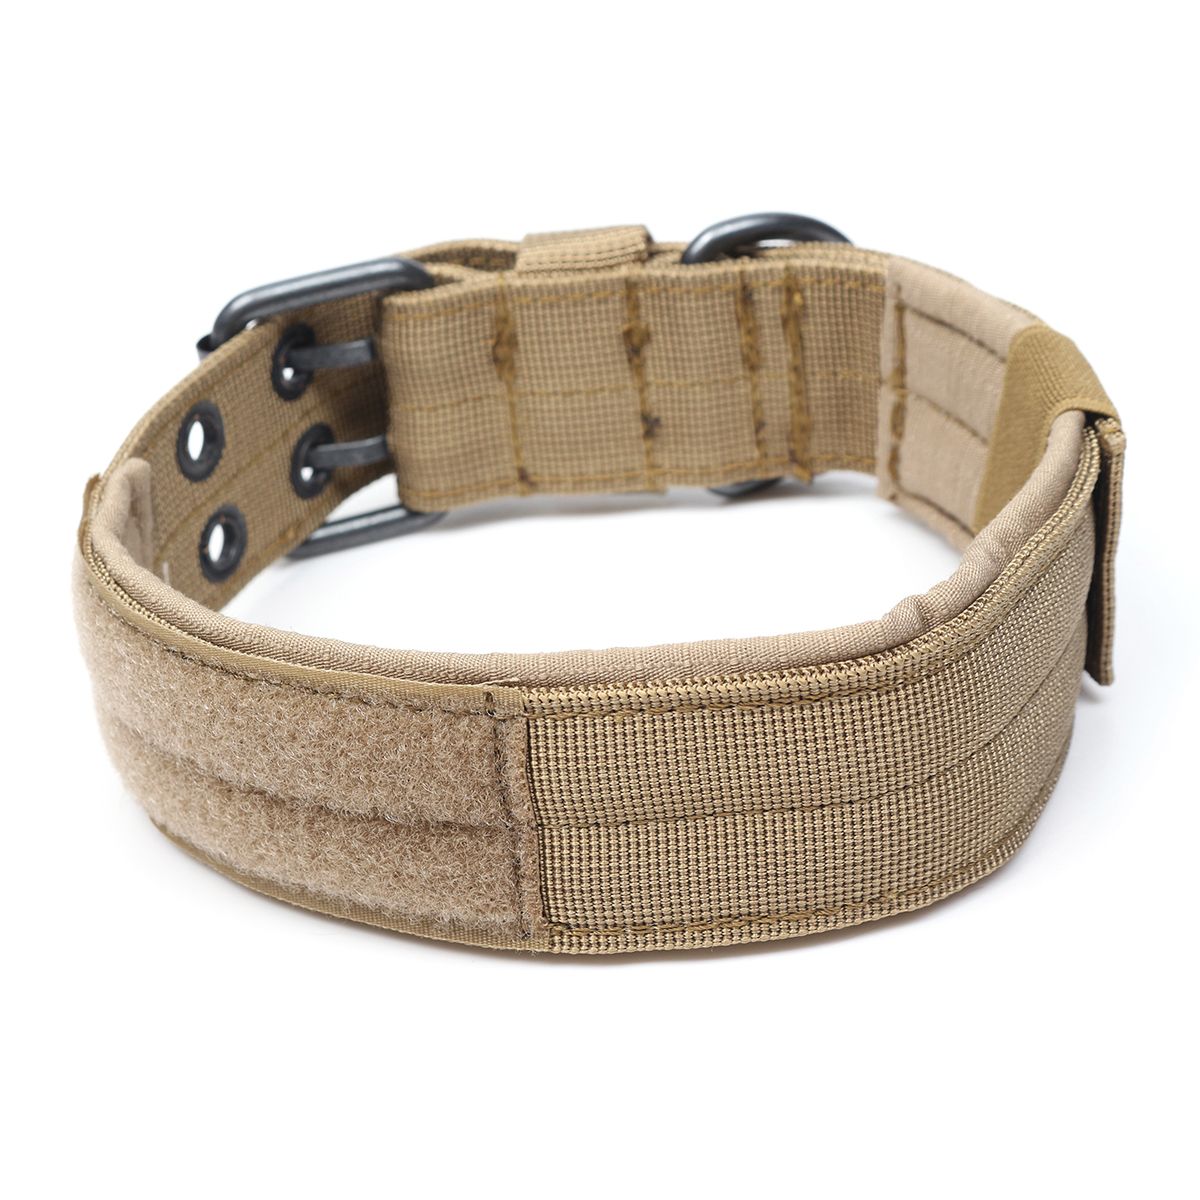 Nylon-Tactical-Dog-Collar-Military-Adjustable-Training-Dog-Collar-with-Metal-D-Ring-Buckle-M-Size-1310254